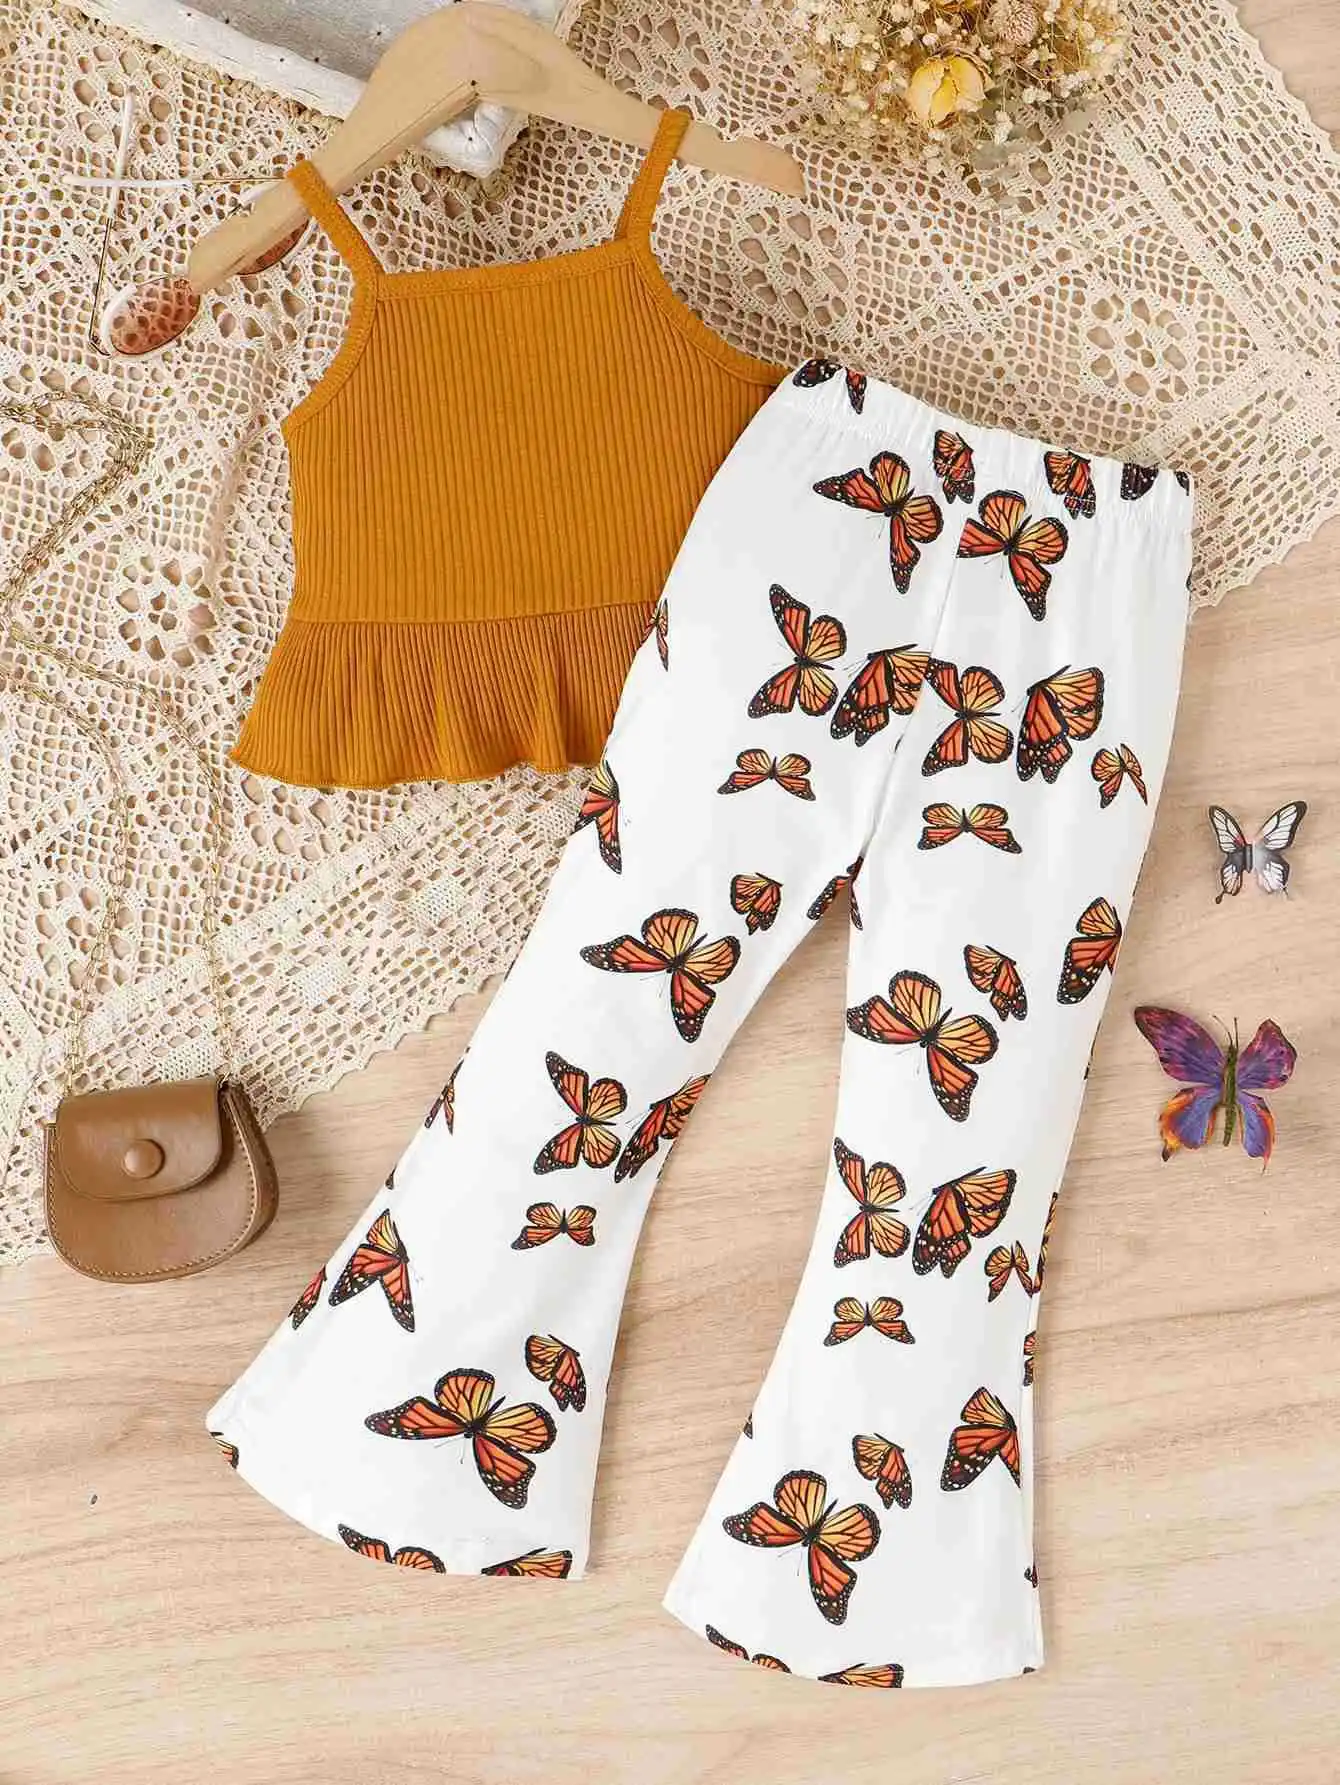 New trendy summer outfits toddler girls sleeveless tops+butterfly printed flare pants boutique two piece clothing for kids